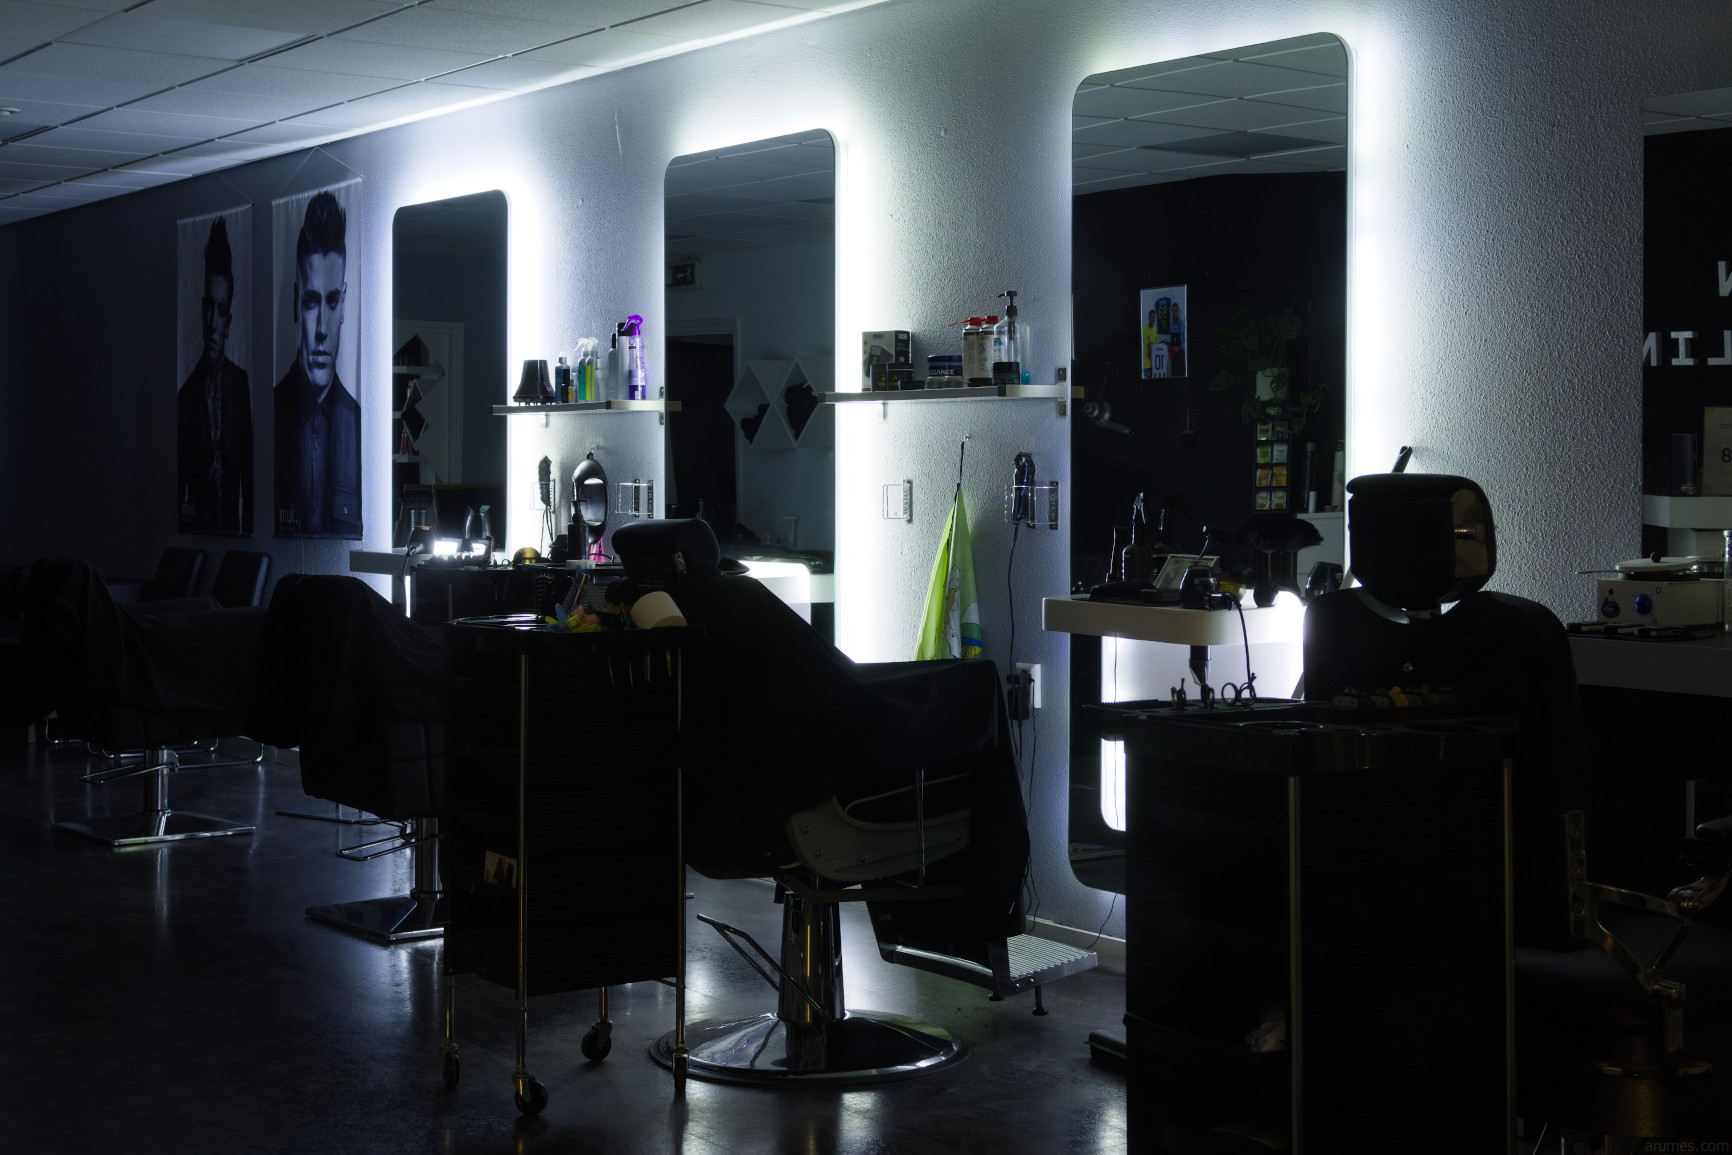 Barber shop at night with backlit mirrors